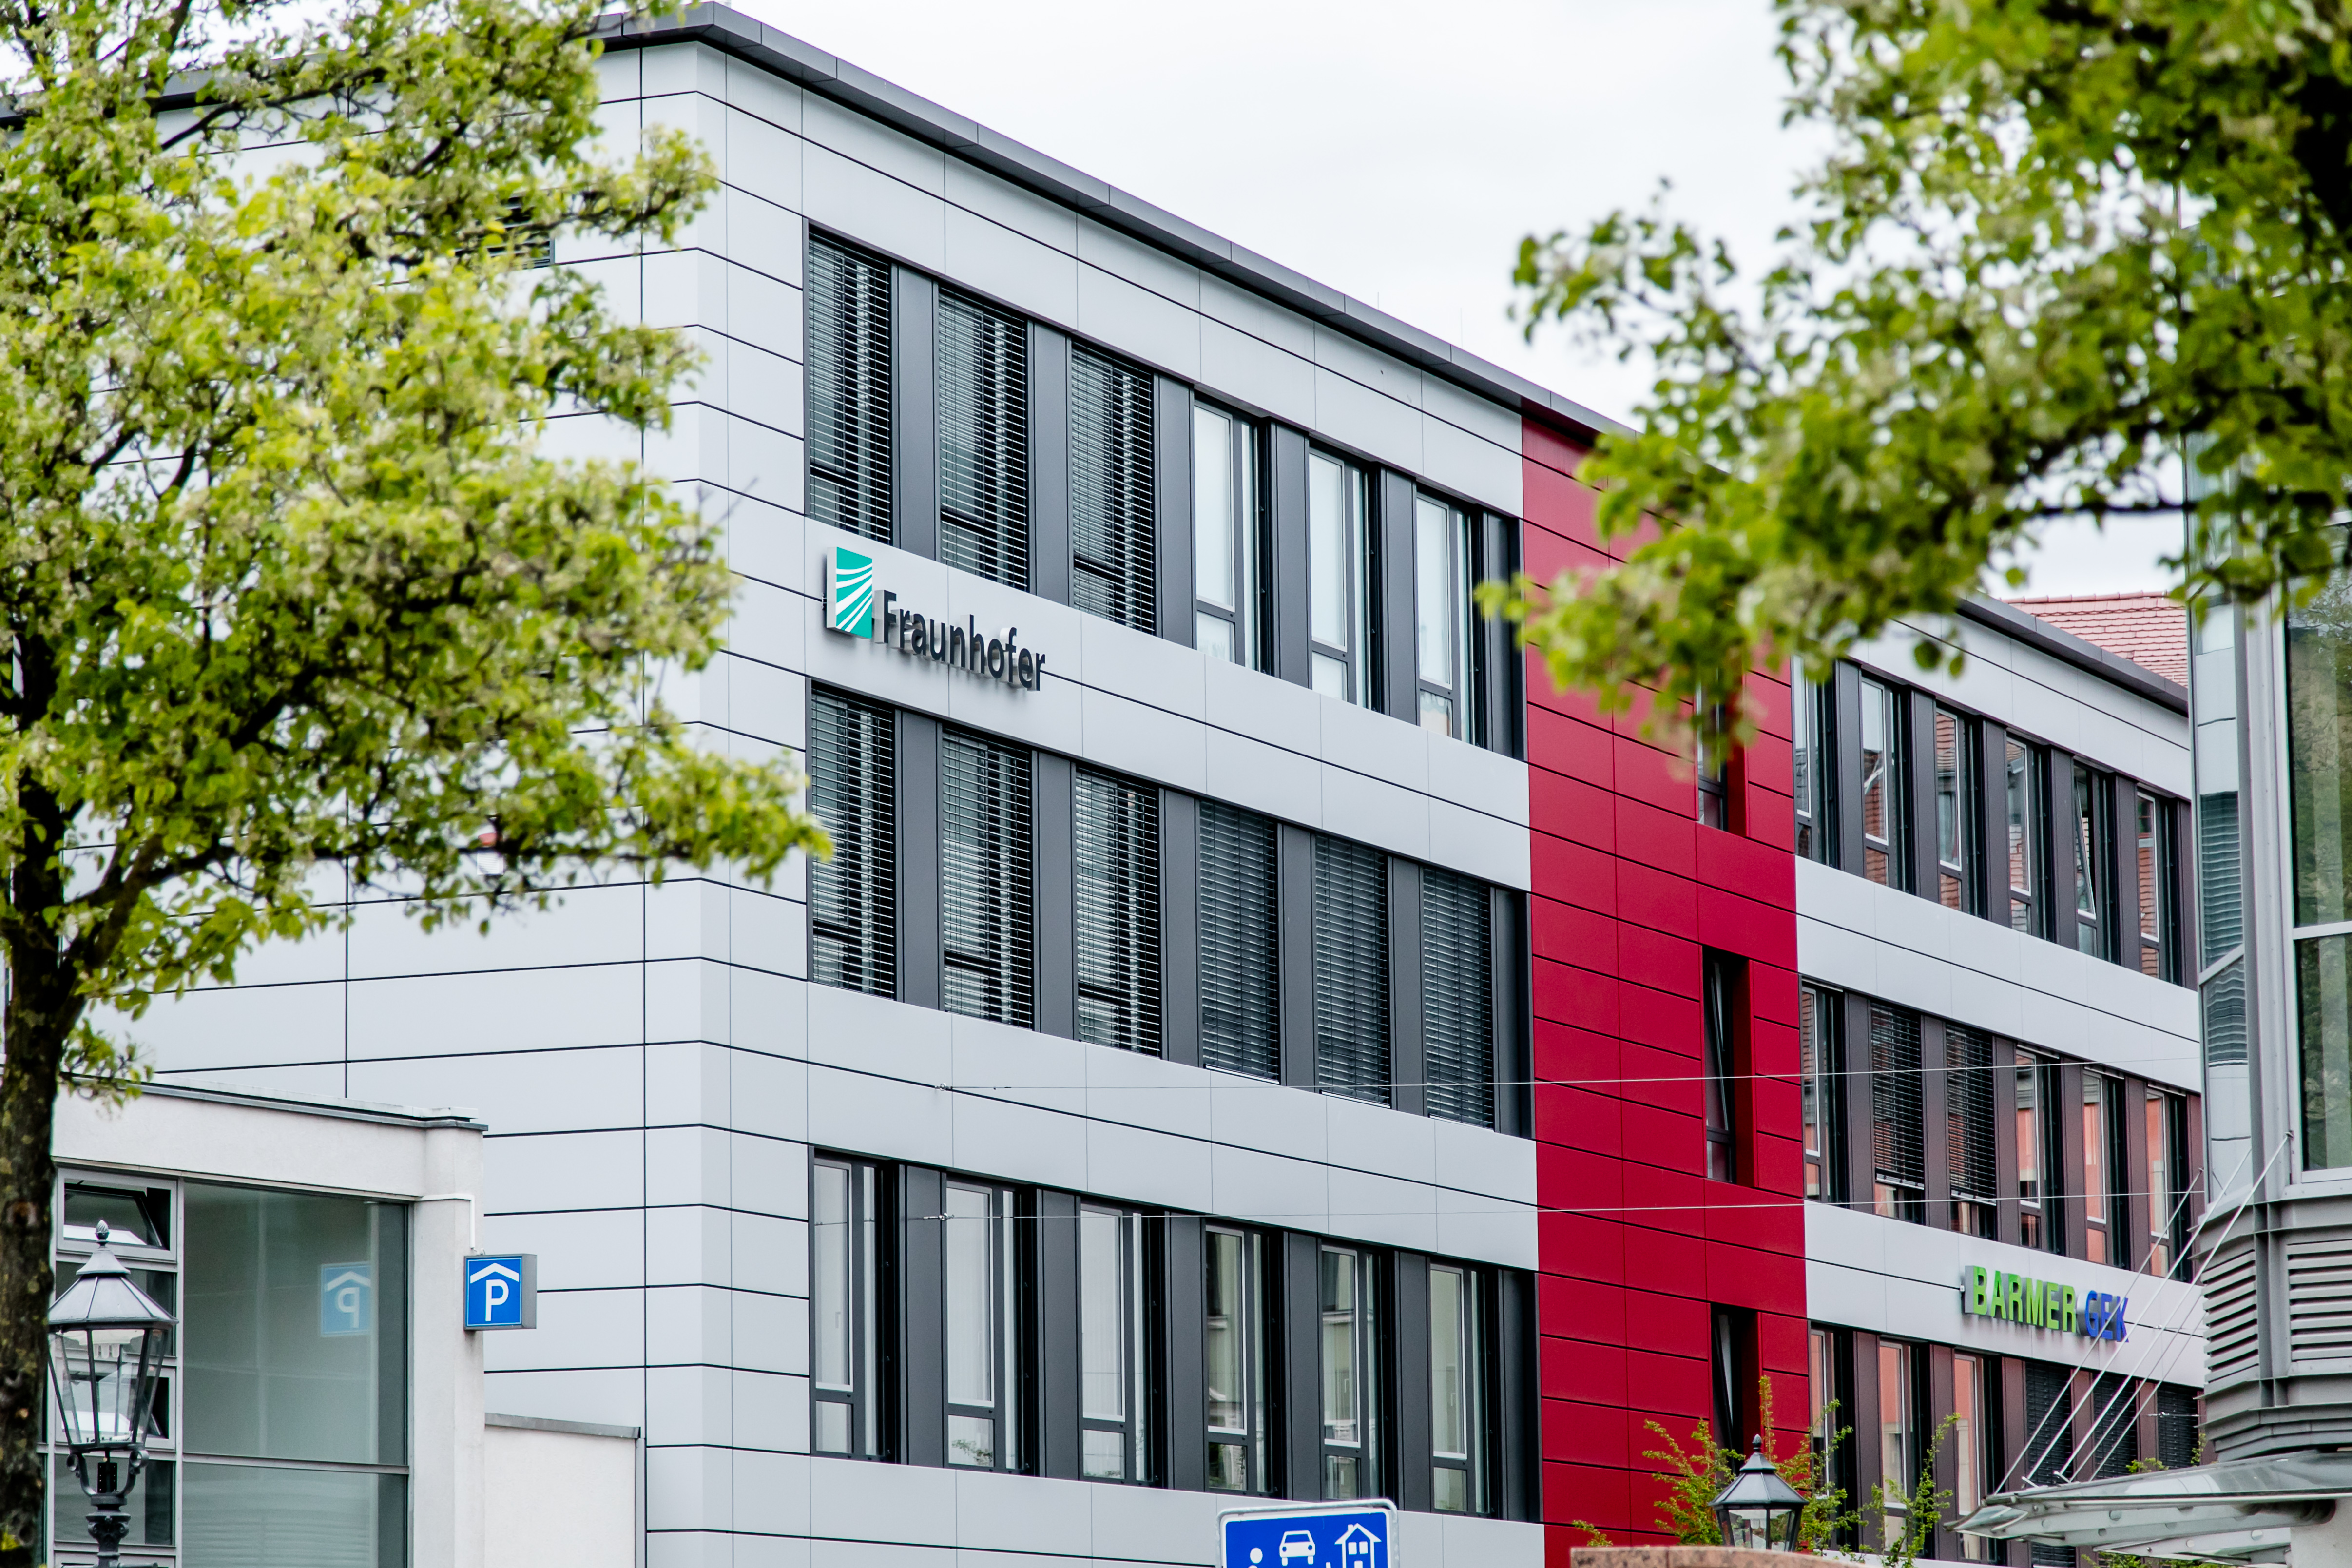 Five years after the launch of the Fraunhofer AZOM Application Center for Optical Metrology and Surface Technologies at Westsächsische Hochschule Zwickau University of Applied Sciences (WHZ), the research institution has been positively evaluated by external reviewers.